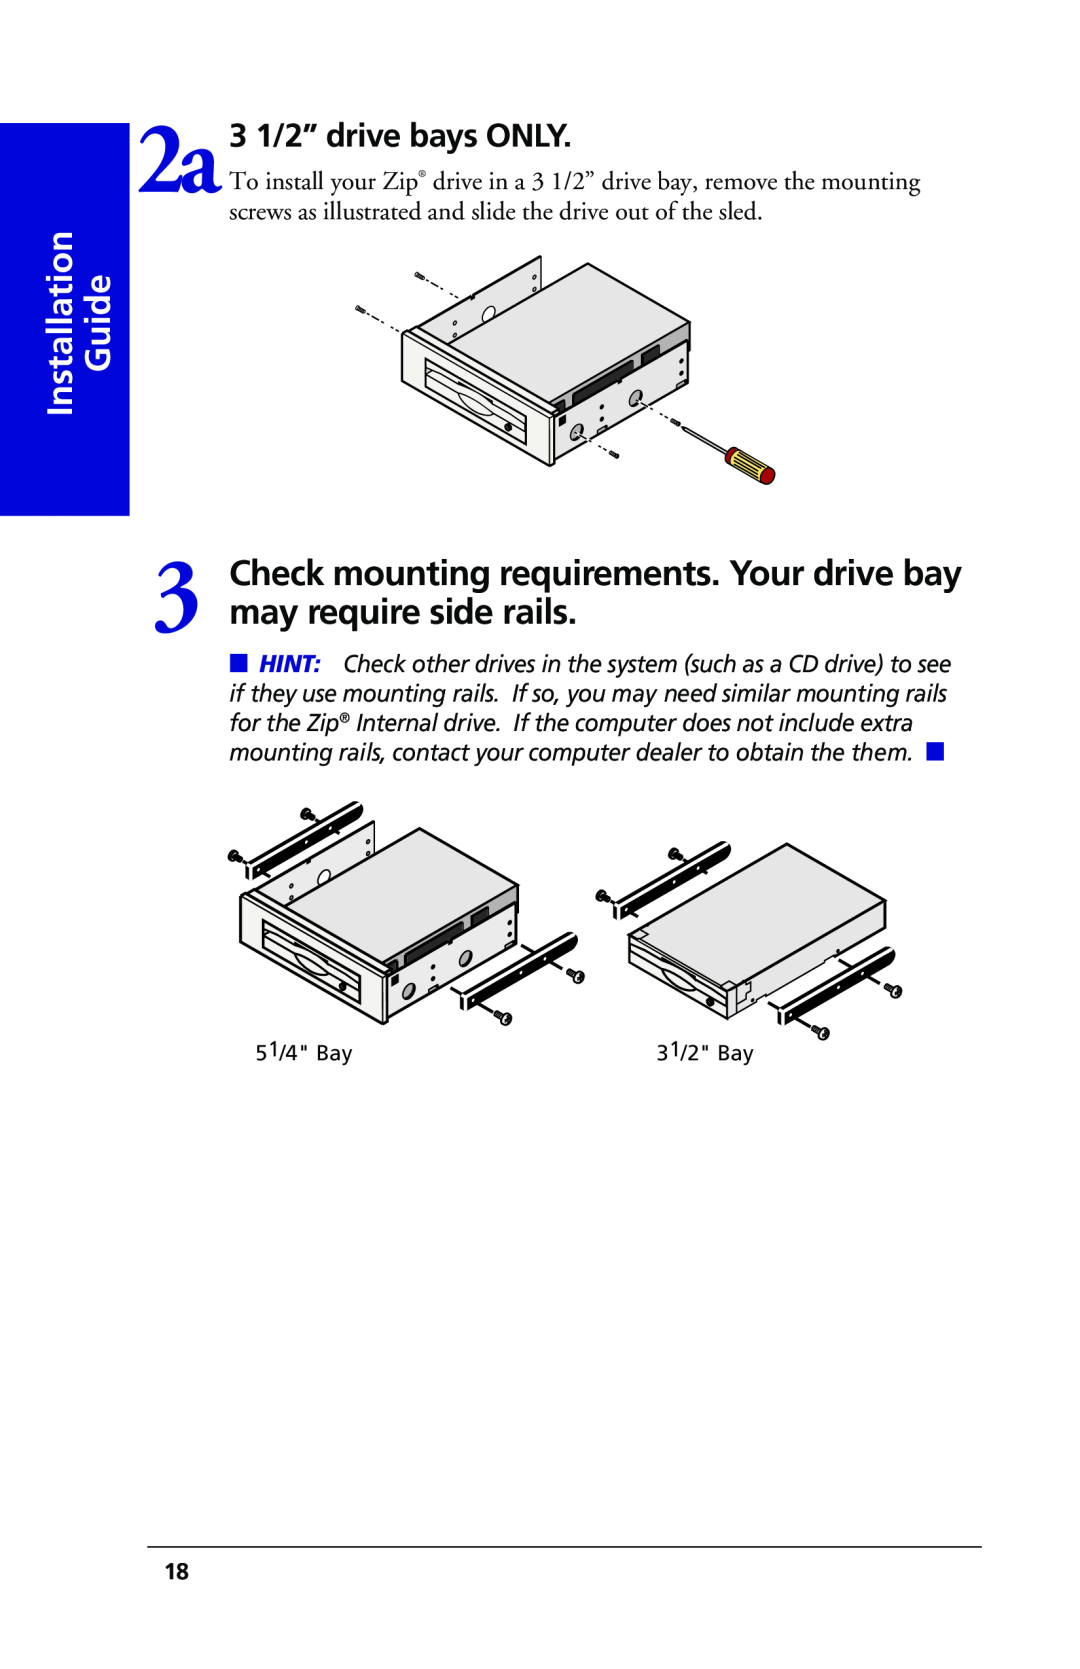 Iomega 03798300 may require side rails, 2a3 1/2” drive bays ONLY, Guide, Check mounting requirements. Your drive bay 